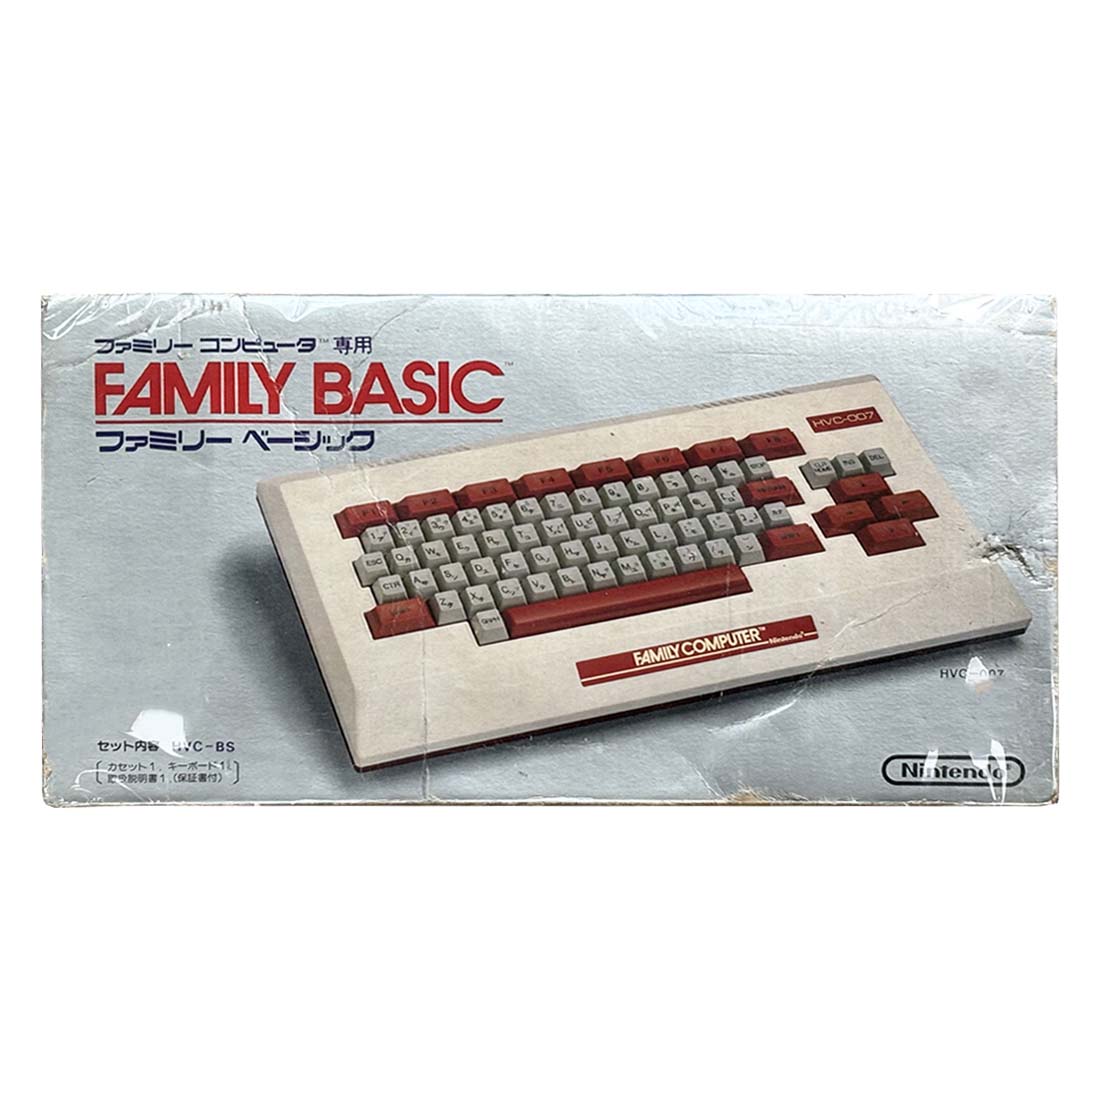 (Pre-Owned) Family computer Family basic Keyboard - لوحة مفاتيح - Store 974 | ستور ٩٧٤